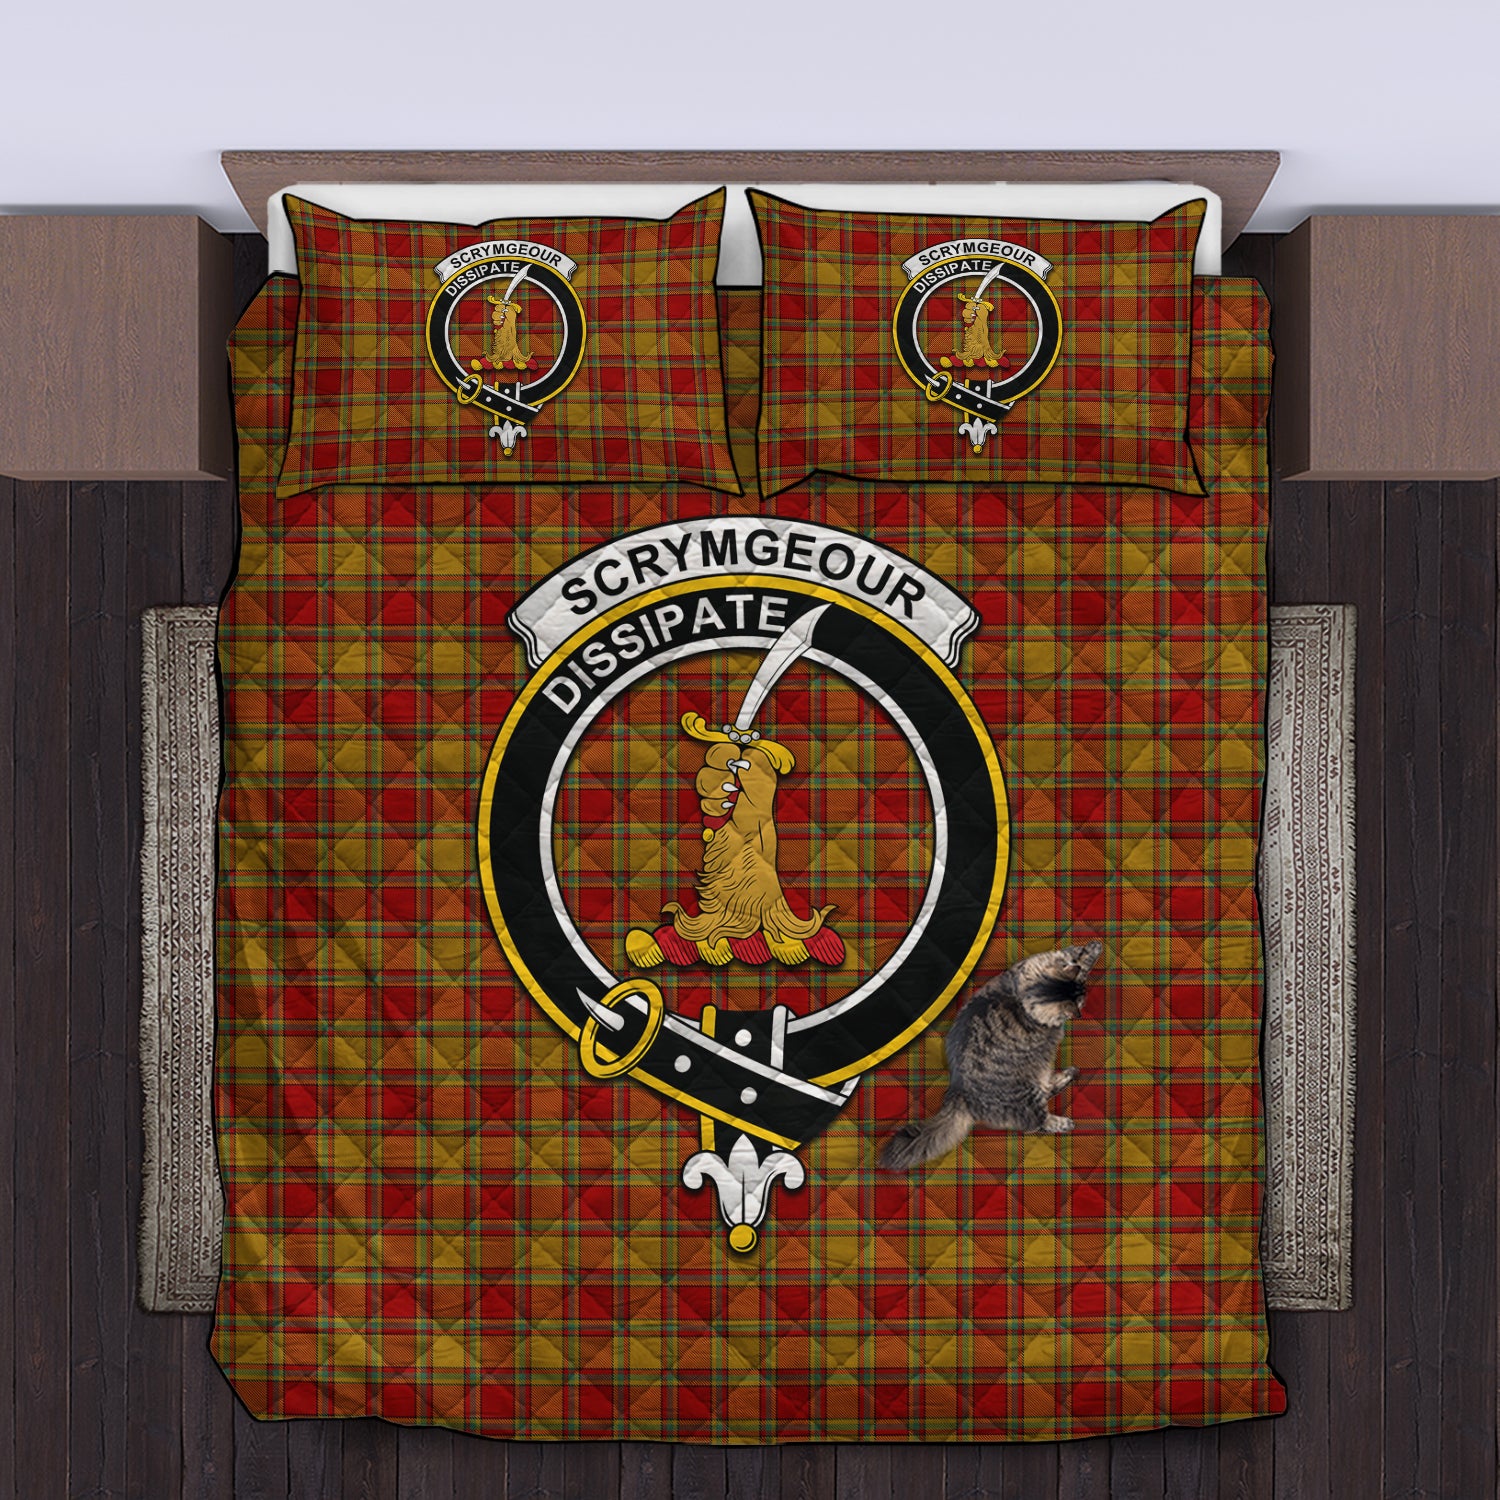 scrymgeour-clan-tartan-quilt-bed-set-family-crest-tartan-quilt-bed-set